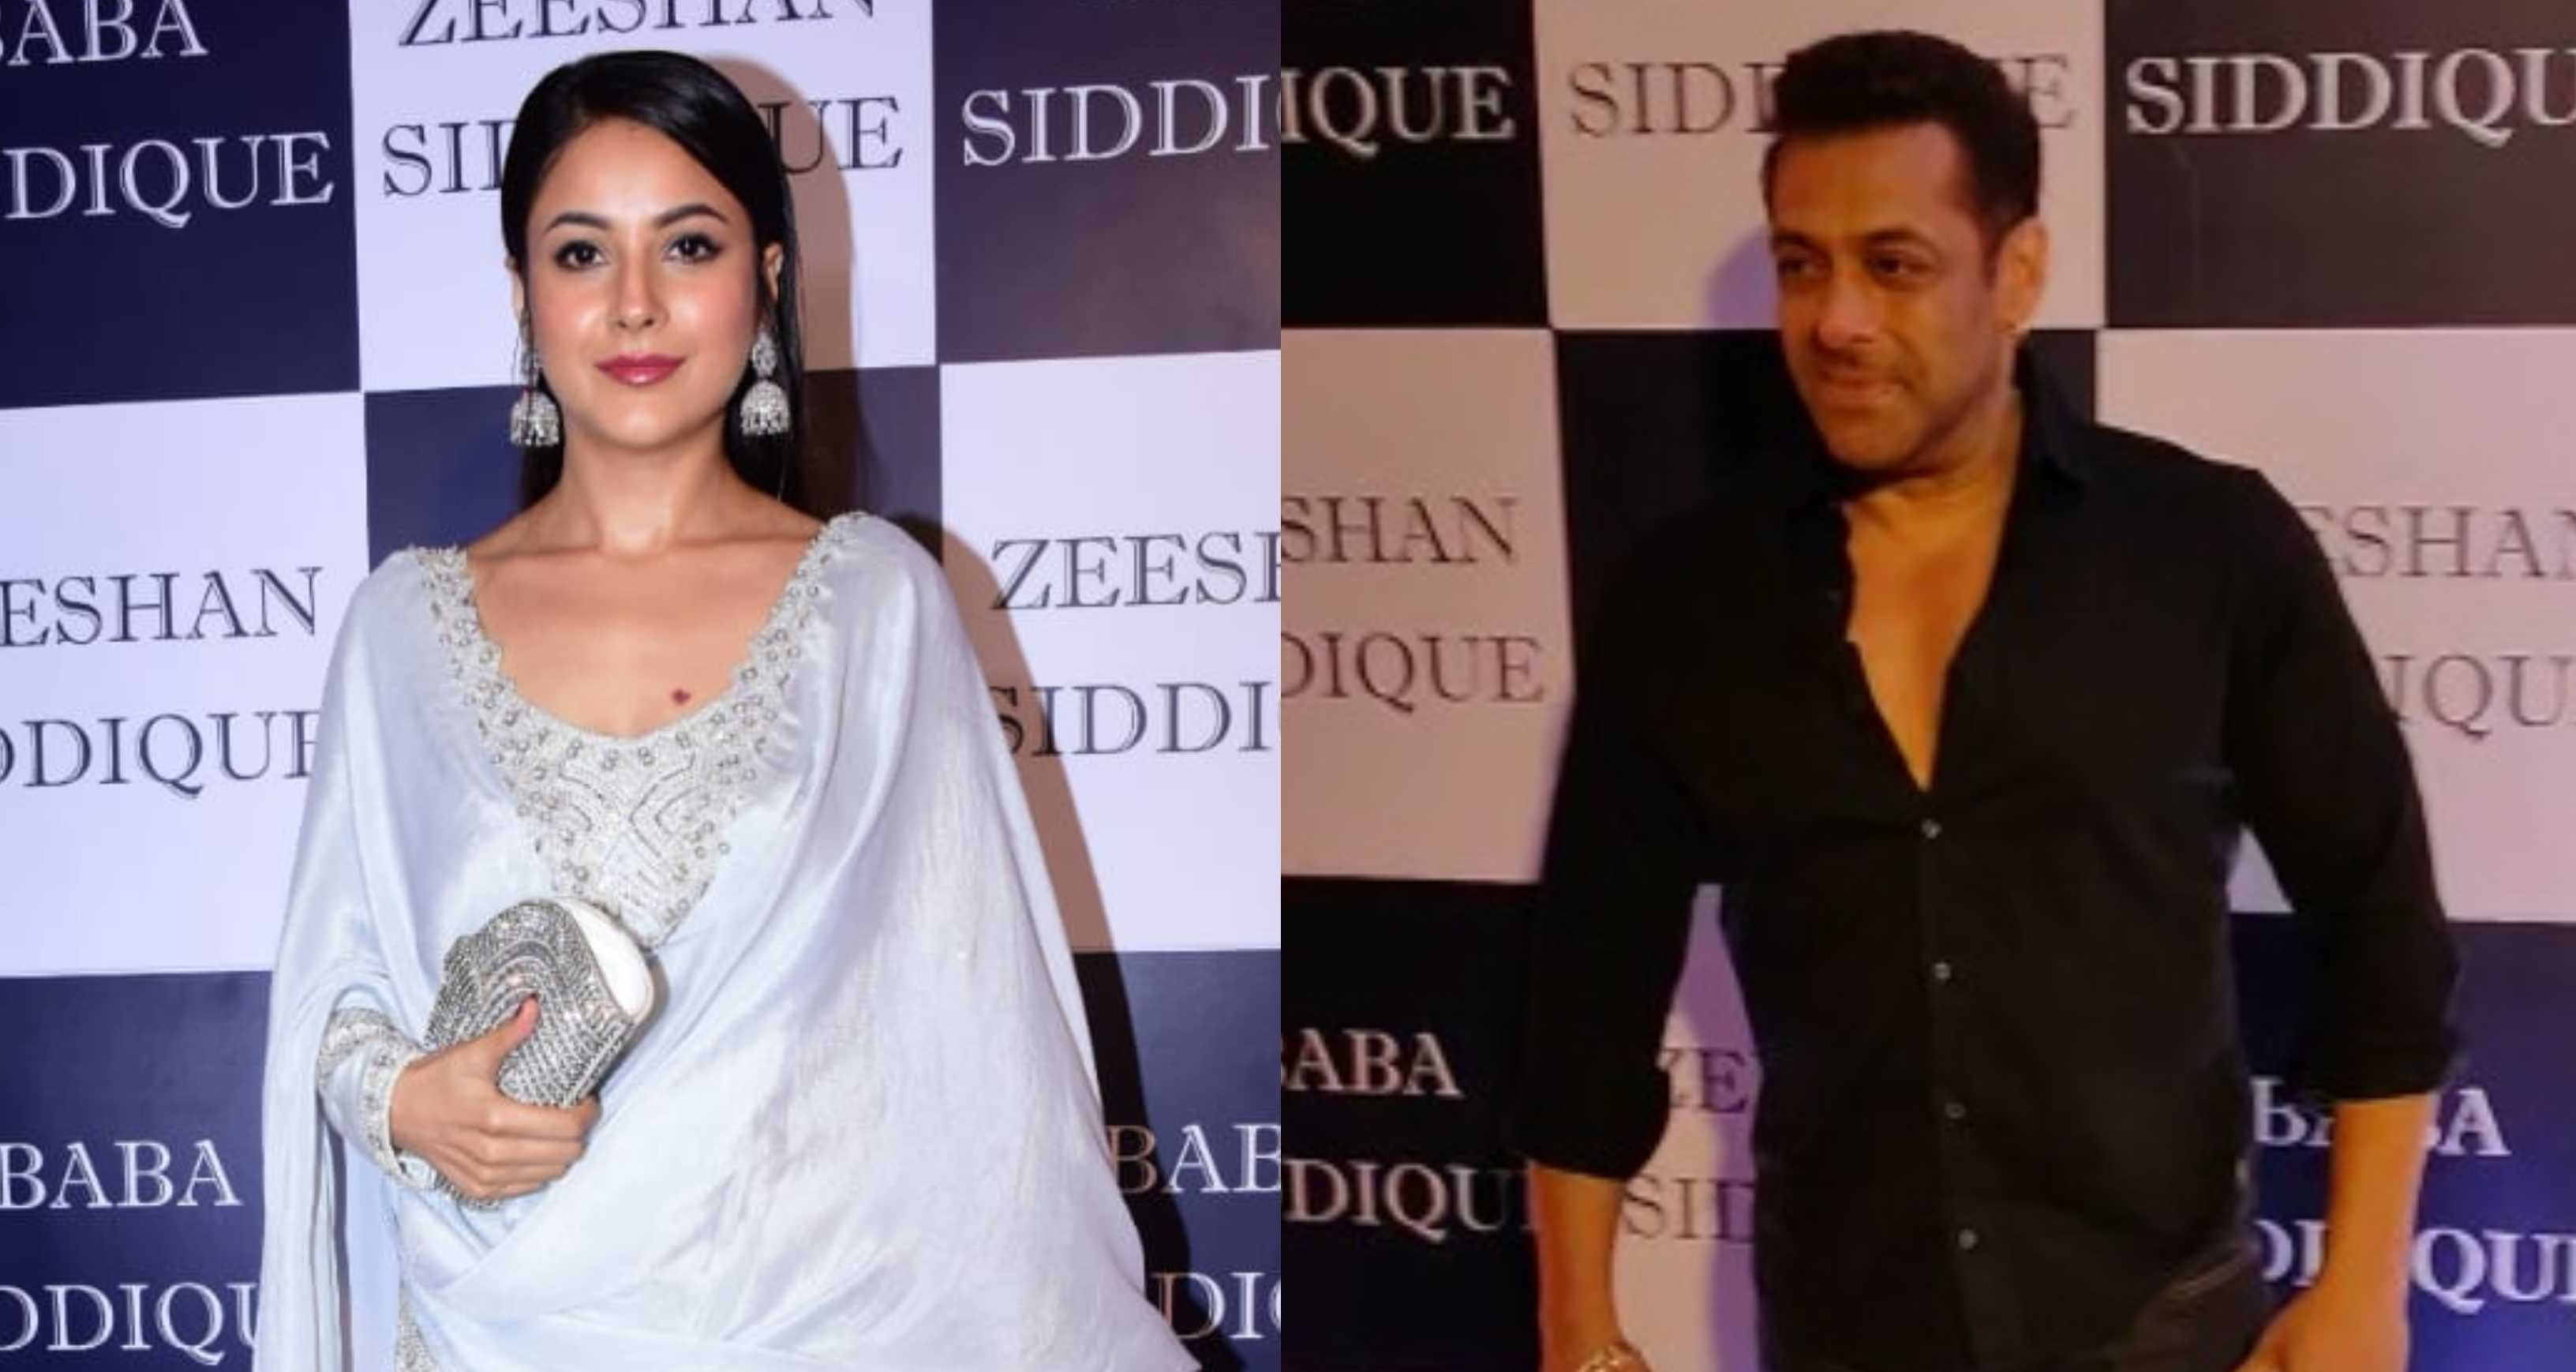 Salman Khan made Shehnaaz Gill sit next to him at Baba Siddique's Iftar party; the two chatted for hours